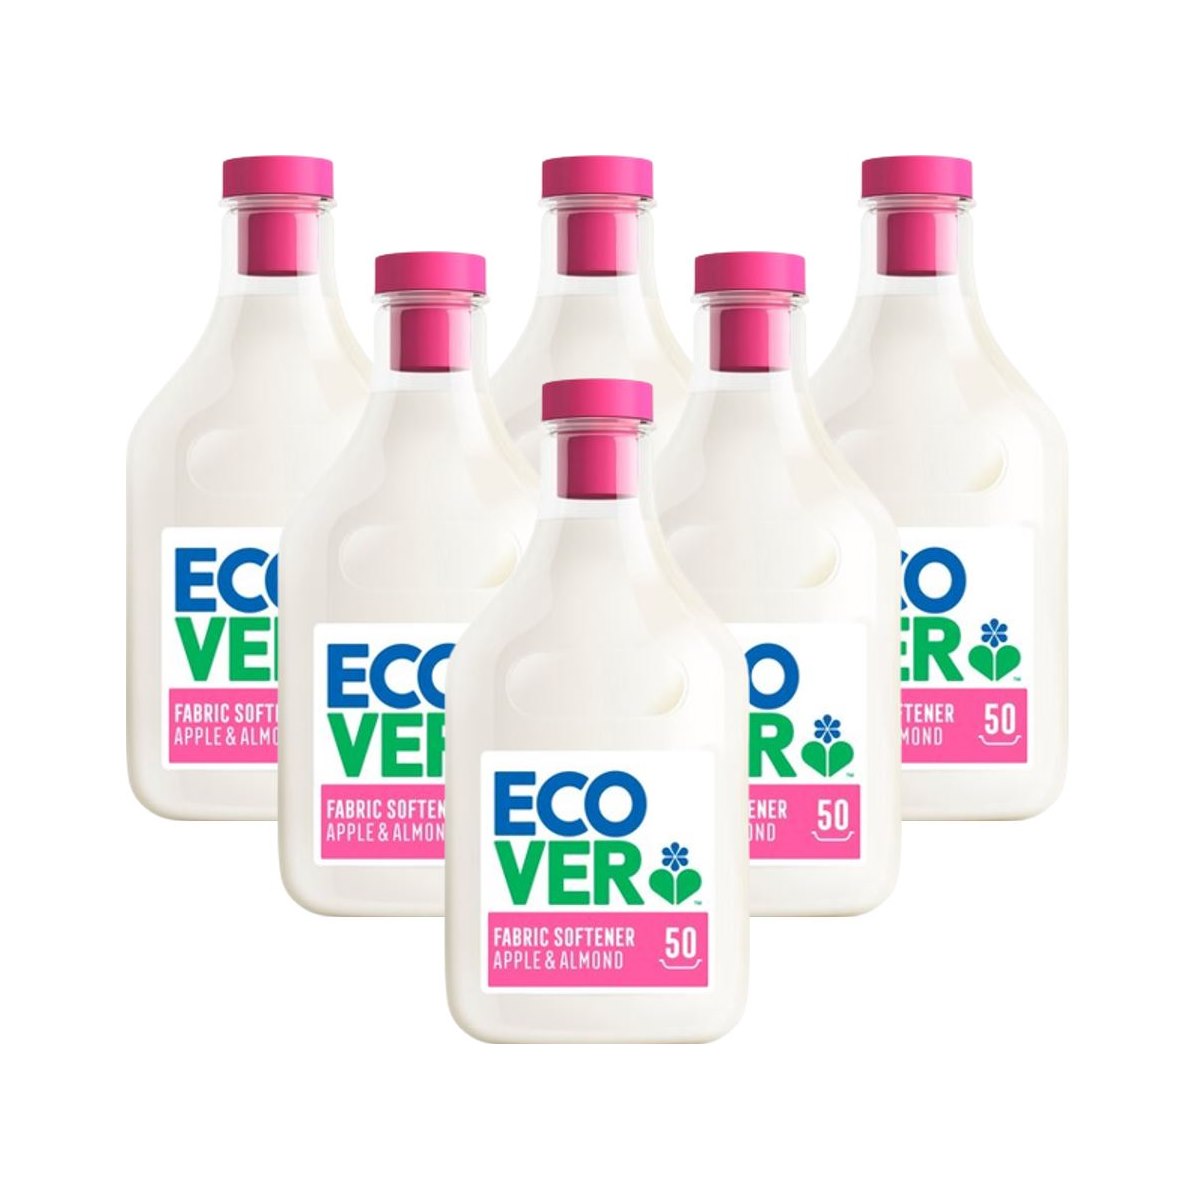 Case of 6 x Ecover Fabric Softener Apple Blossom and Almond Fragrance 1.5 Litre